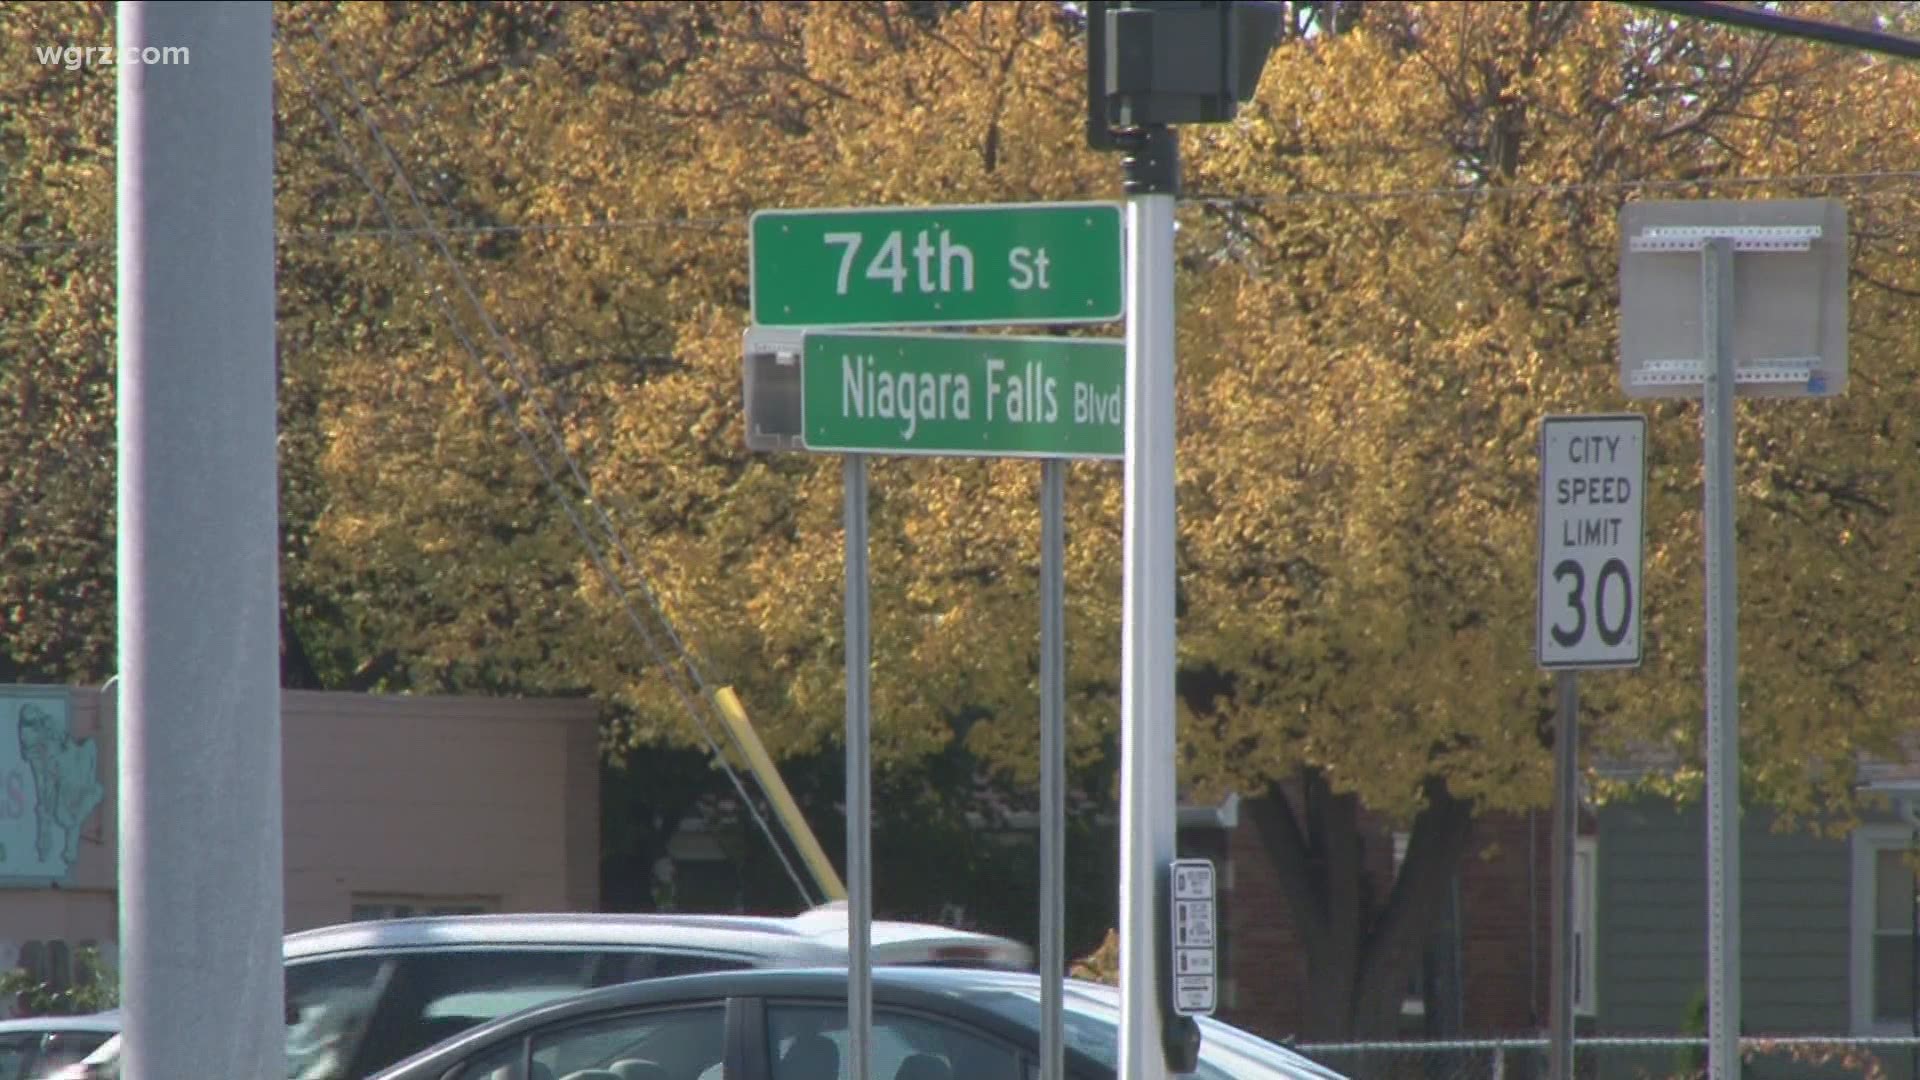 Police say charges are pending against a 32-year-old man who hit two other cars on Niagara Falls Boulevard and then tried to drive off before hitting a utility pole.